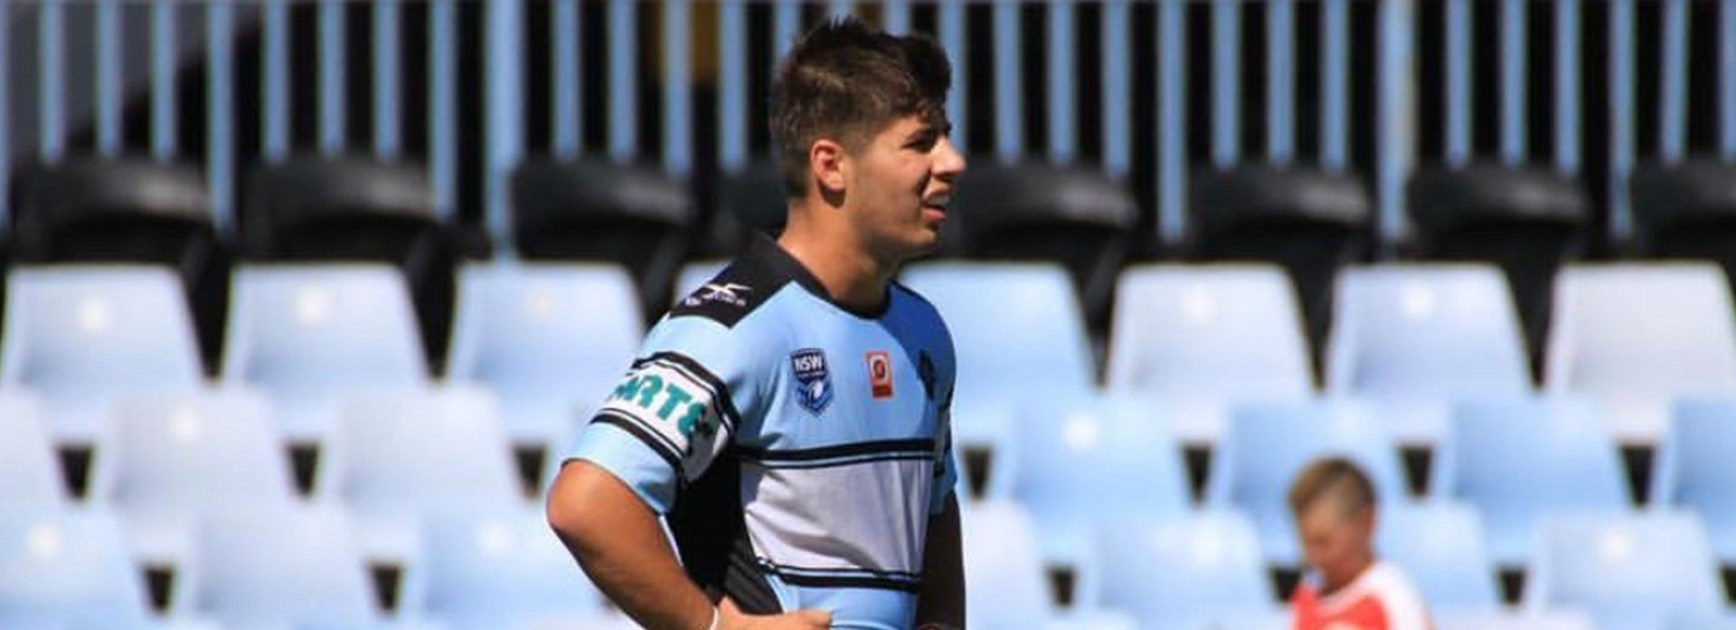 Bulldogs sign young Sharks star